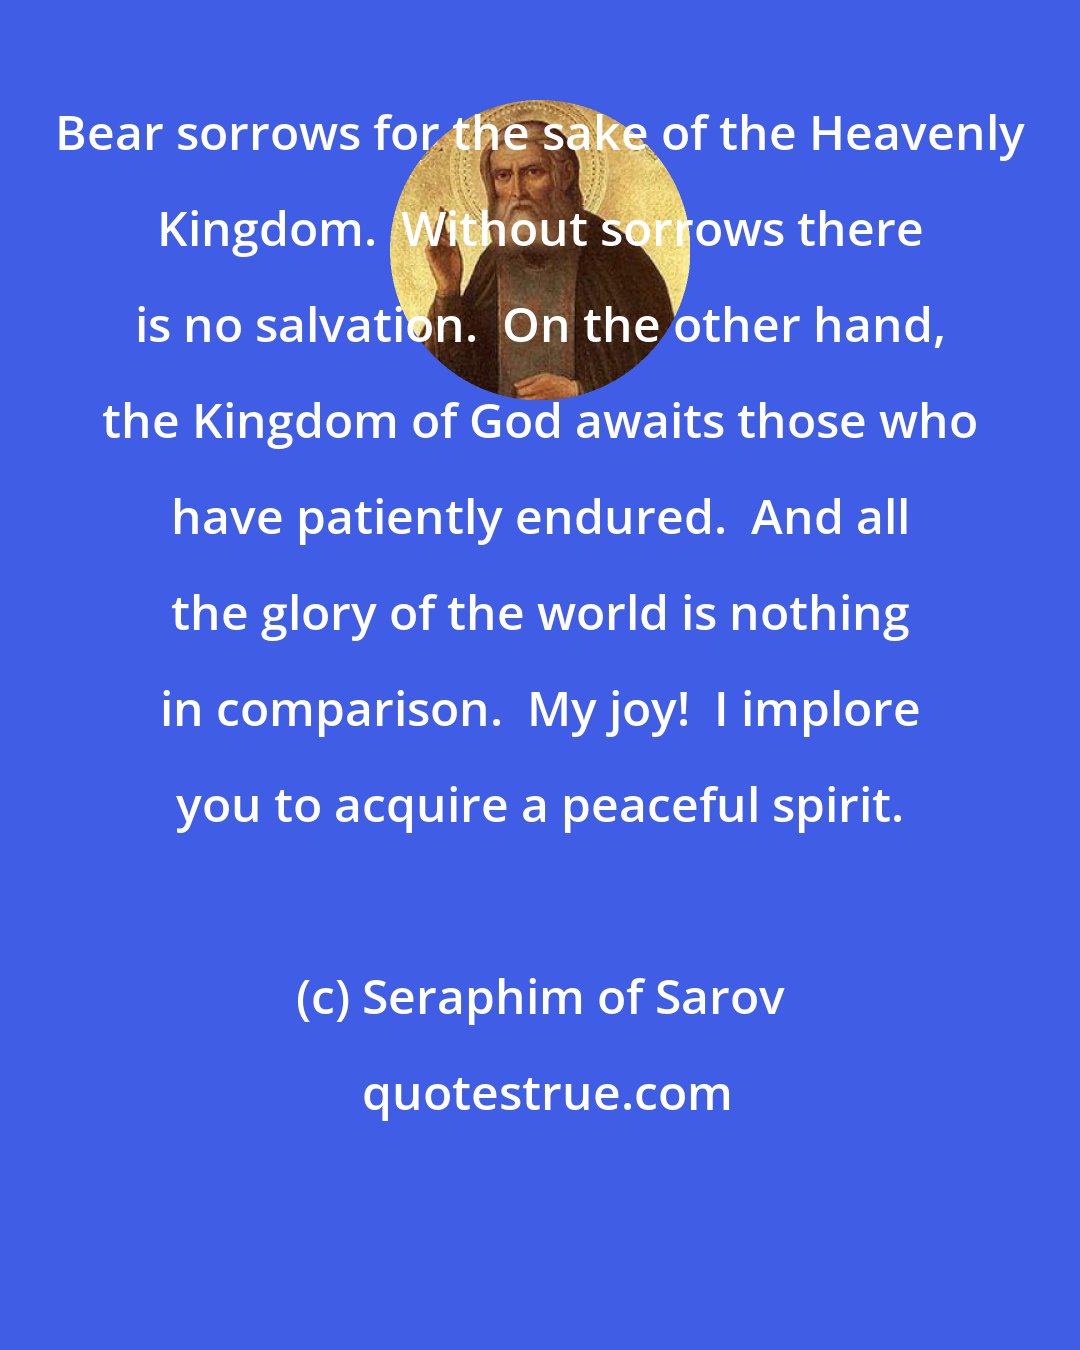 Seraphim of Sarov: Bear sorrows for the sake of the Heavenly Kingdom.  Without sorrows there is no salvation.  On the other hand, the Kingdom of God awaits those who have patiently endured.  And all the glory of the world is nothing in comparison.  My joy!  I implore you to acquire a peaceful spirit.